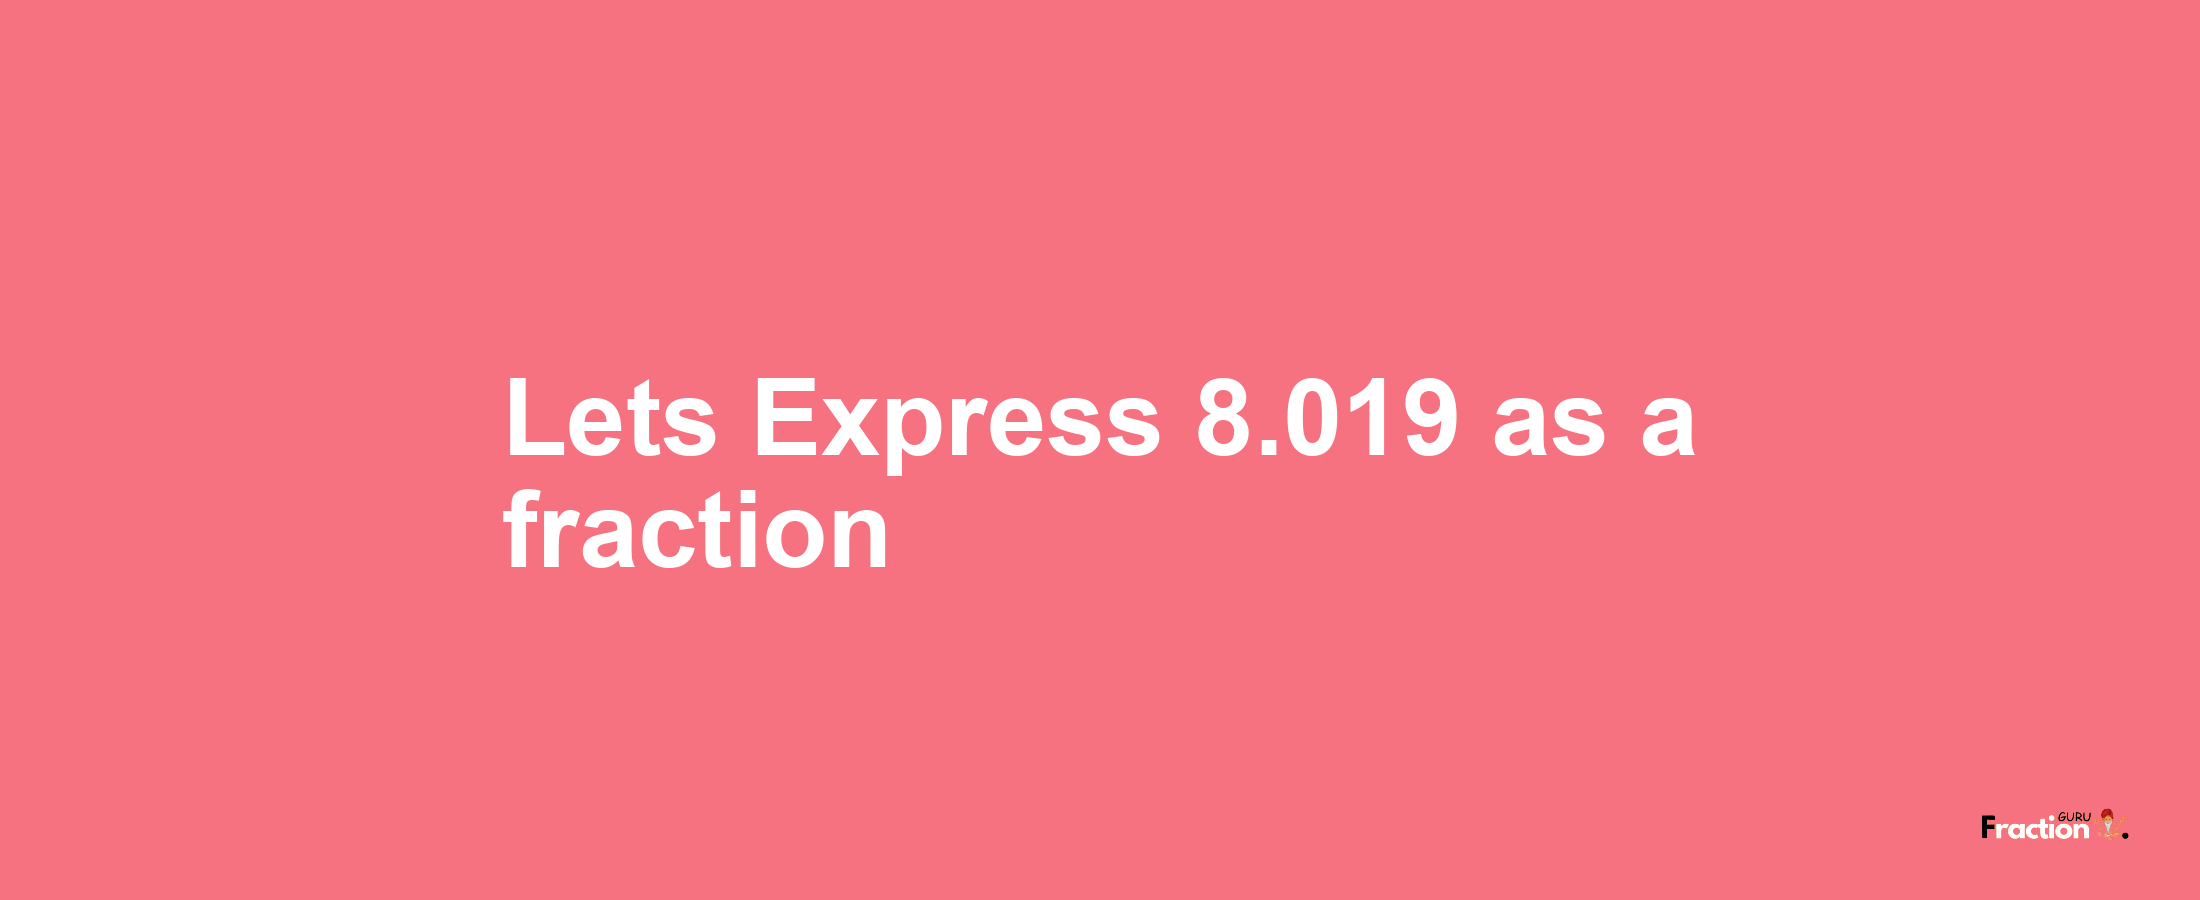 Lets Express 8.019 as afraction